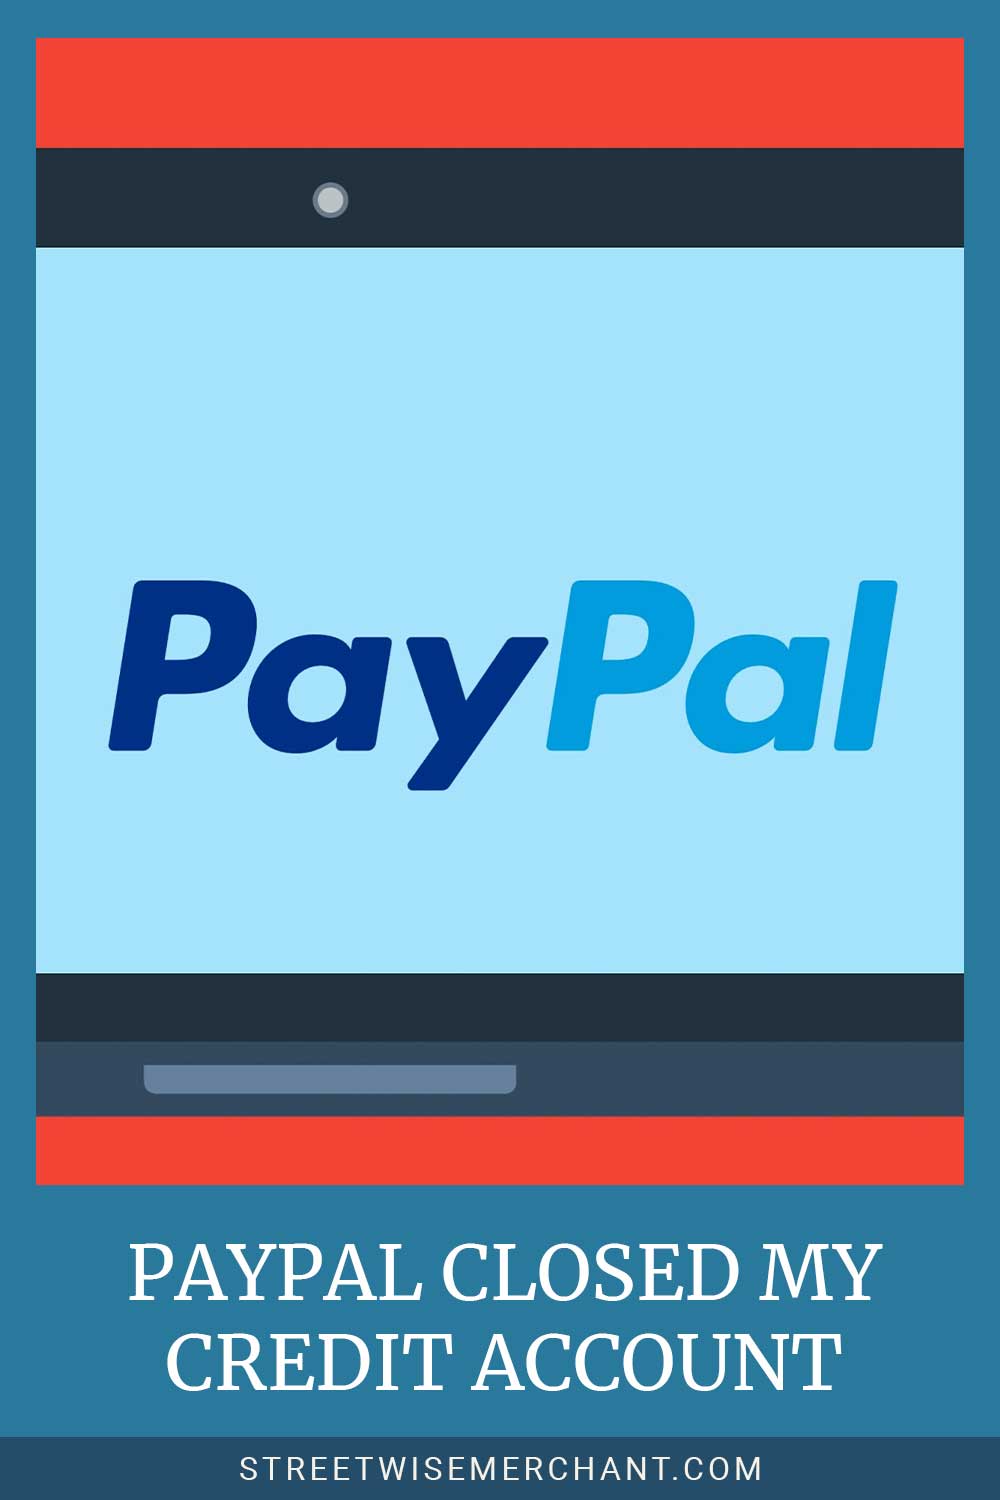 PayPal logo - They Closed My Credit Account